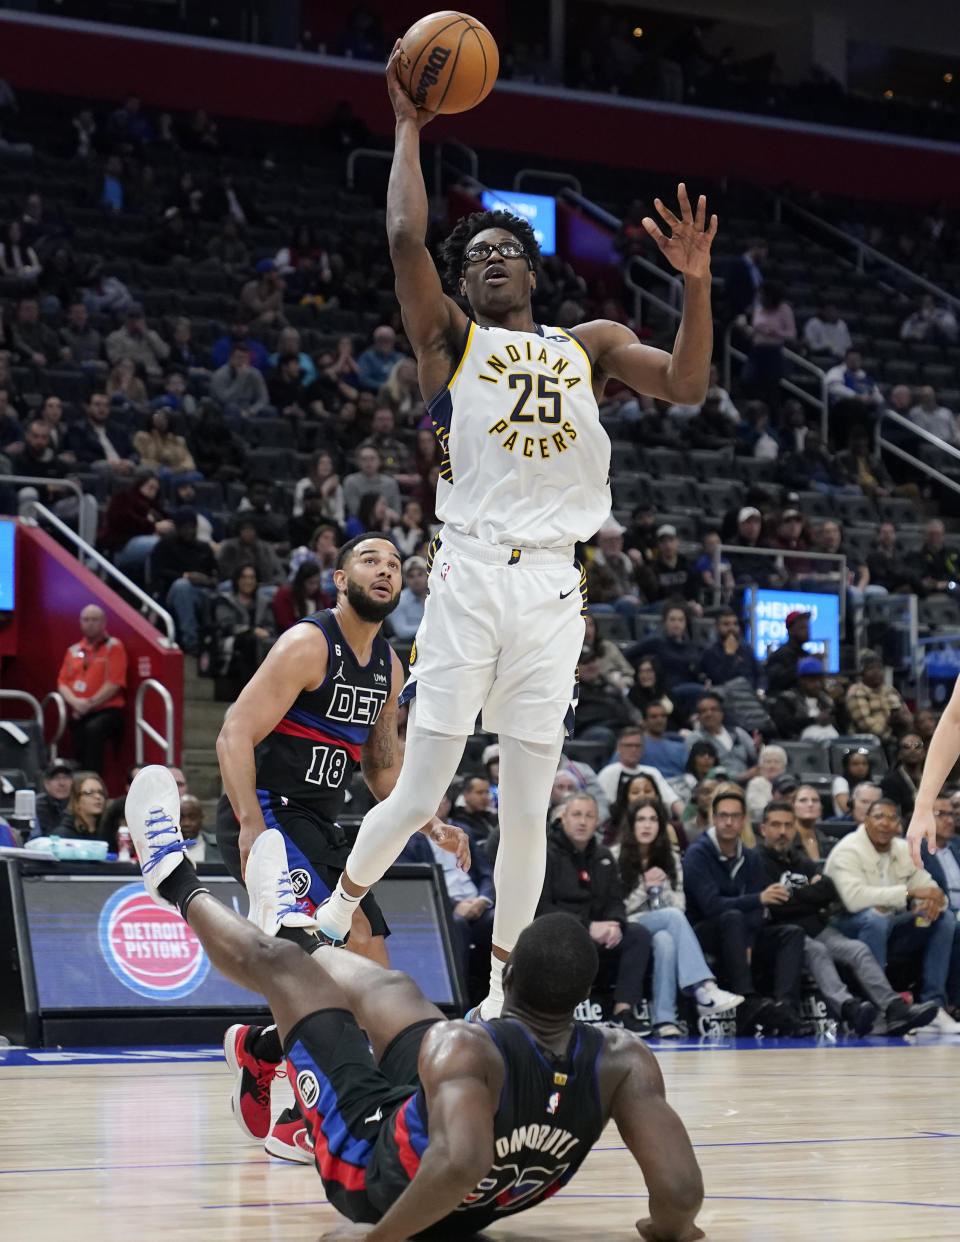 Indiana Pacers forward Jalen Smith (25) makes a layup over Detroit Pistons forward Eugene Omoruyi (97) during the second half of an NBA basketball game, Monday, March 13, 2023, in Detroit. (AP Photo/Carlos Osorio)